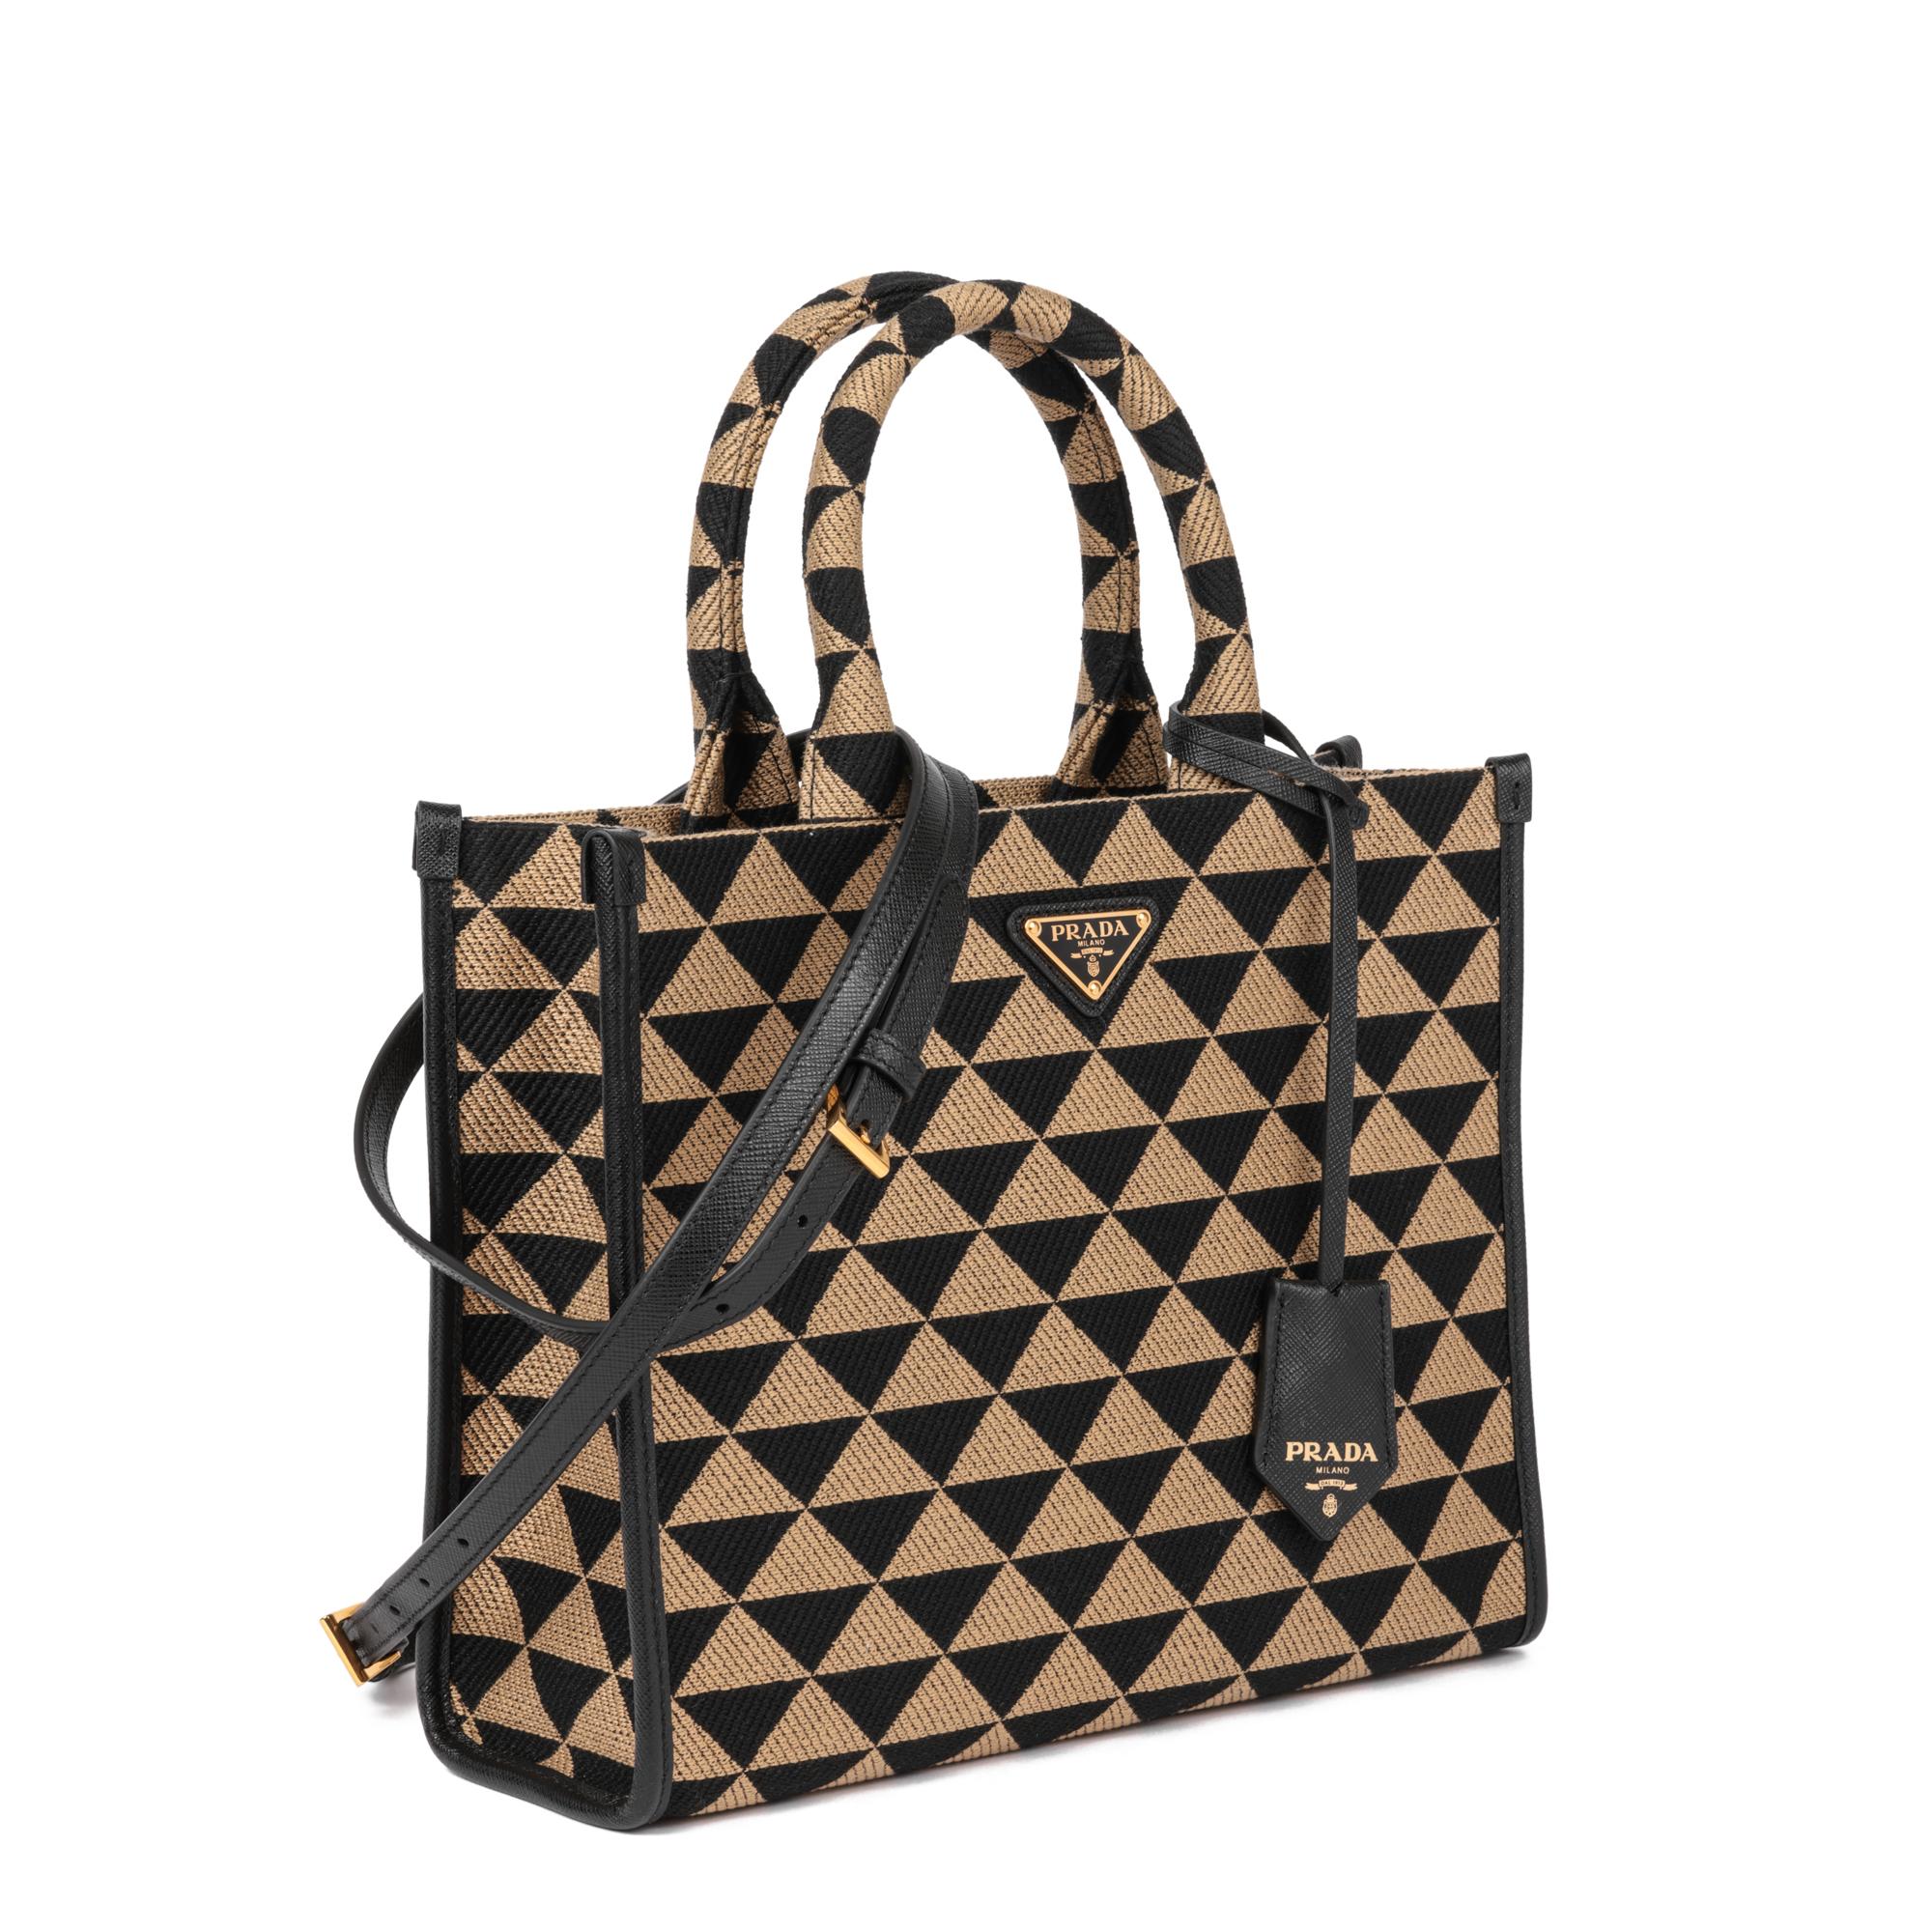 PRADA
Black & Beige Embroidered Fabric Small Symbole

Xupes Reference: HB5206
Serial Number: 7/D
Age (Circa): 2023
Accompanied By: Prada Dust Bag, Shoulder Strap
Authenticity Details: Serial Tag (Made in Italy)
Gender: Ladies
Type: Tote, Shoulder,